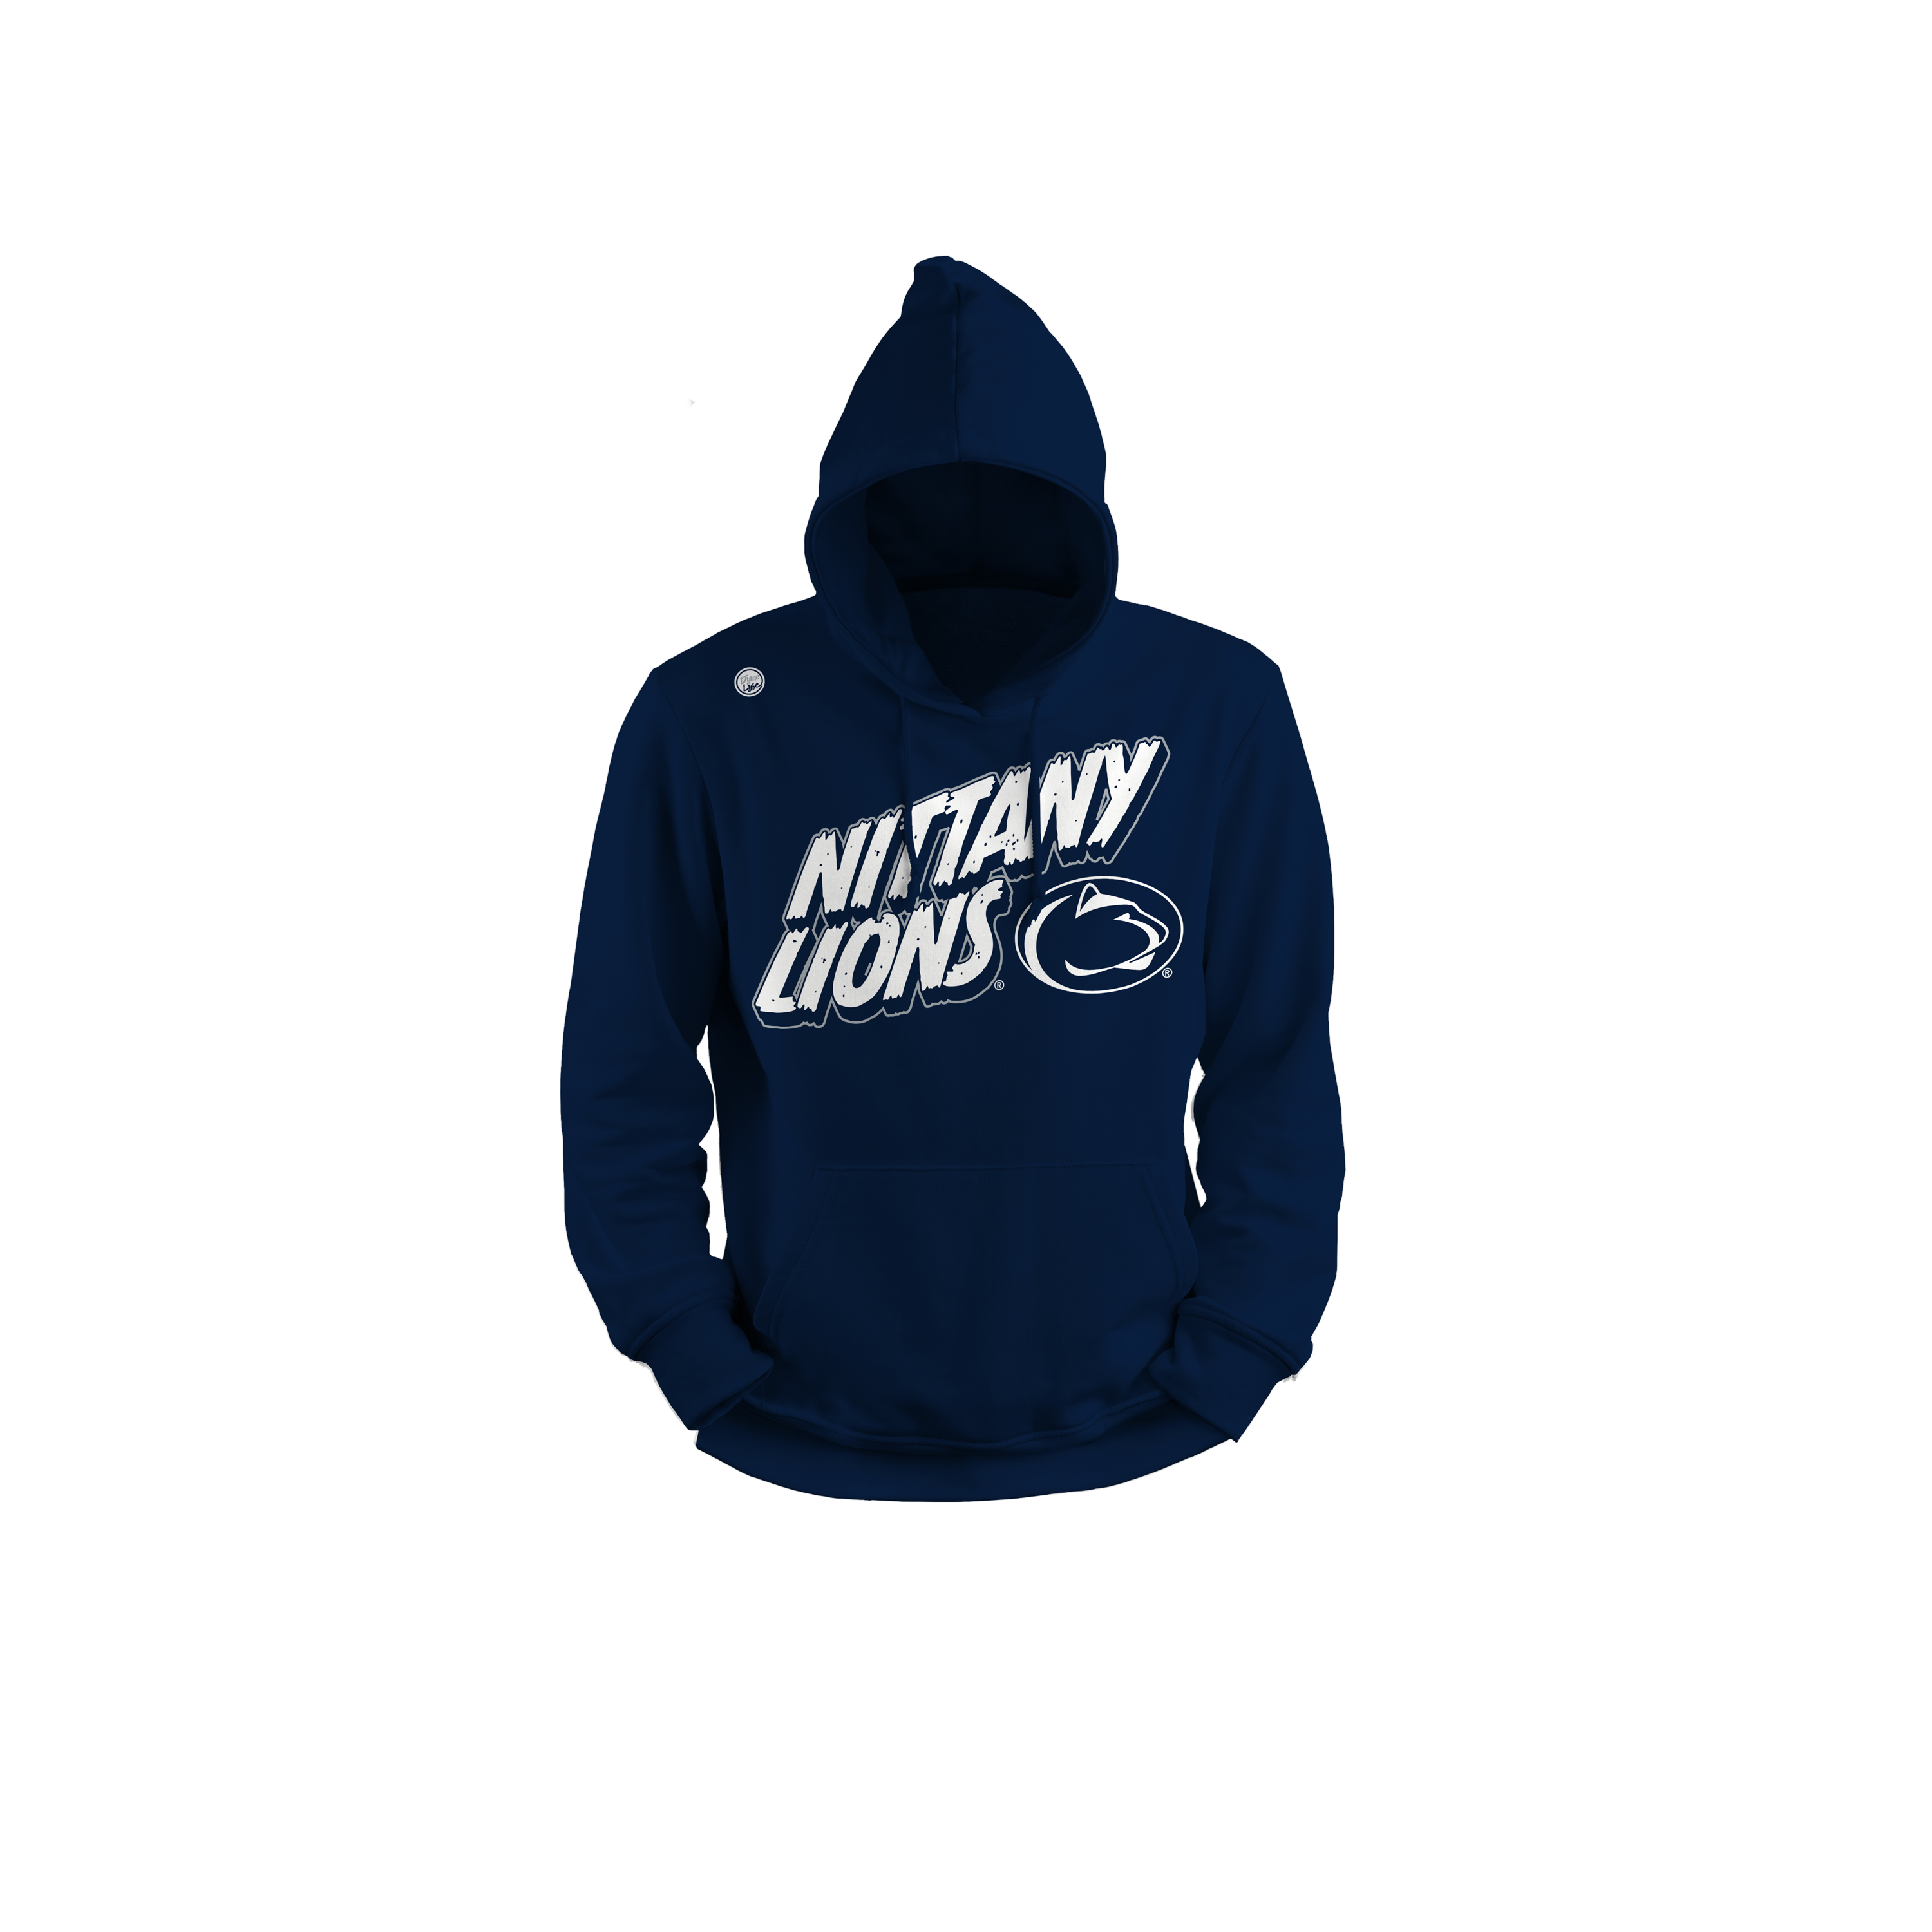 Penn State Nittany Lions Youth Hoodie